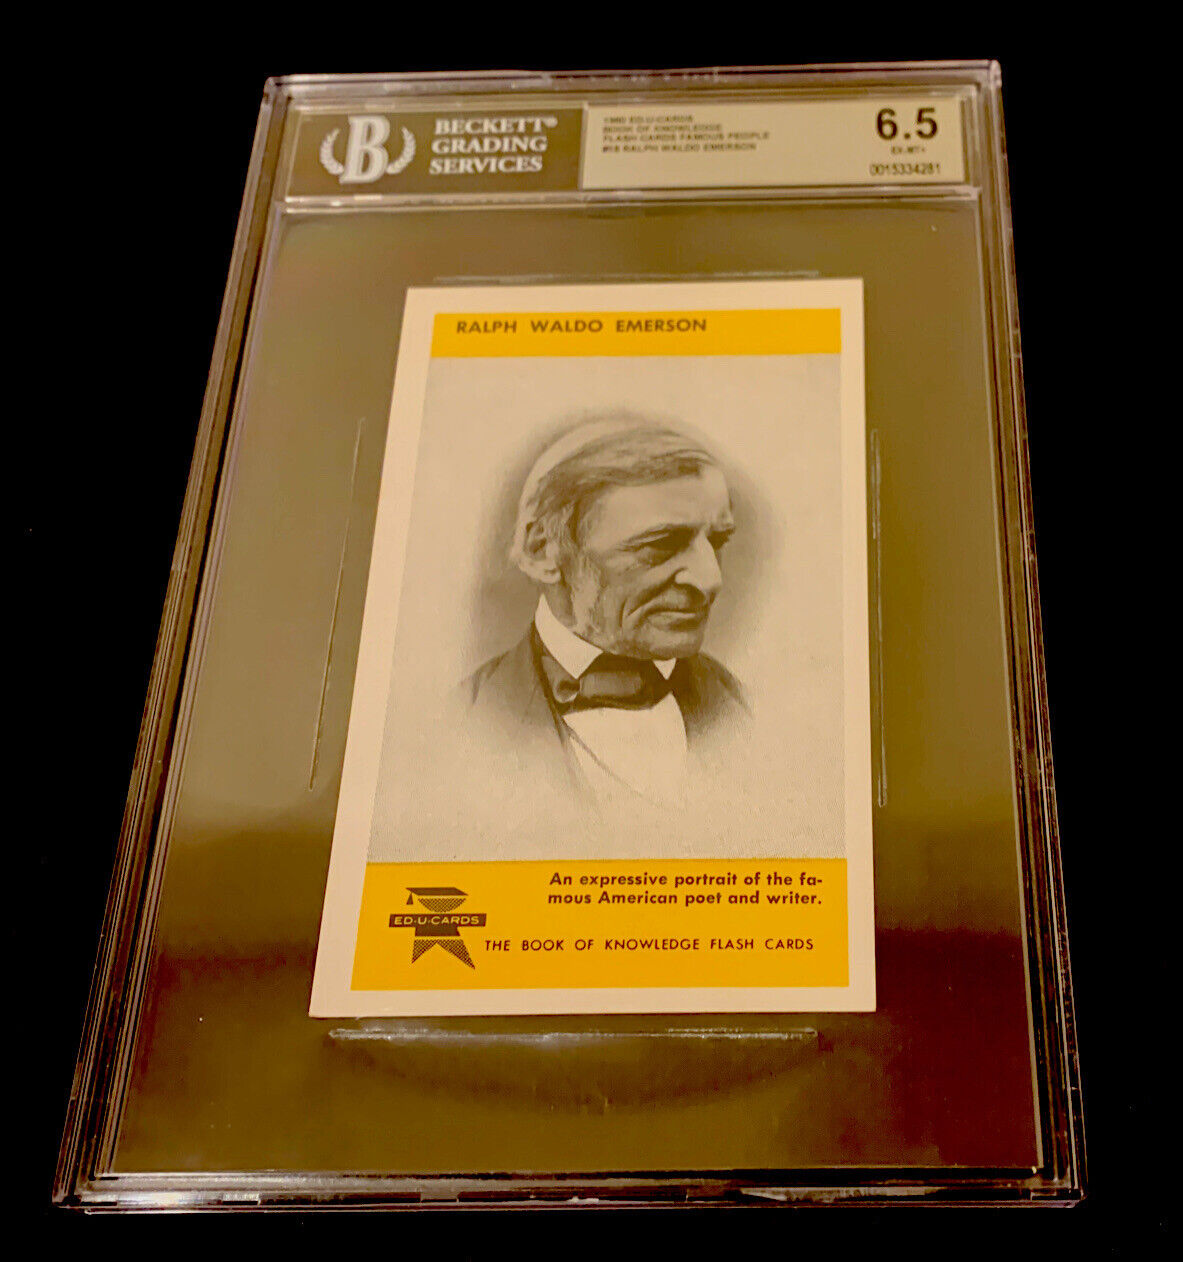 RALPH WALDO EMERSON RARE 1960 BOOK OF KNOWLEDGE CARD FAMOUS PEOPLE BGS 6.5